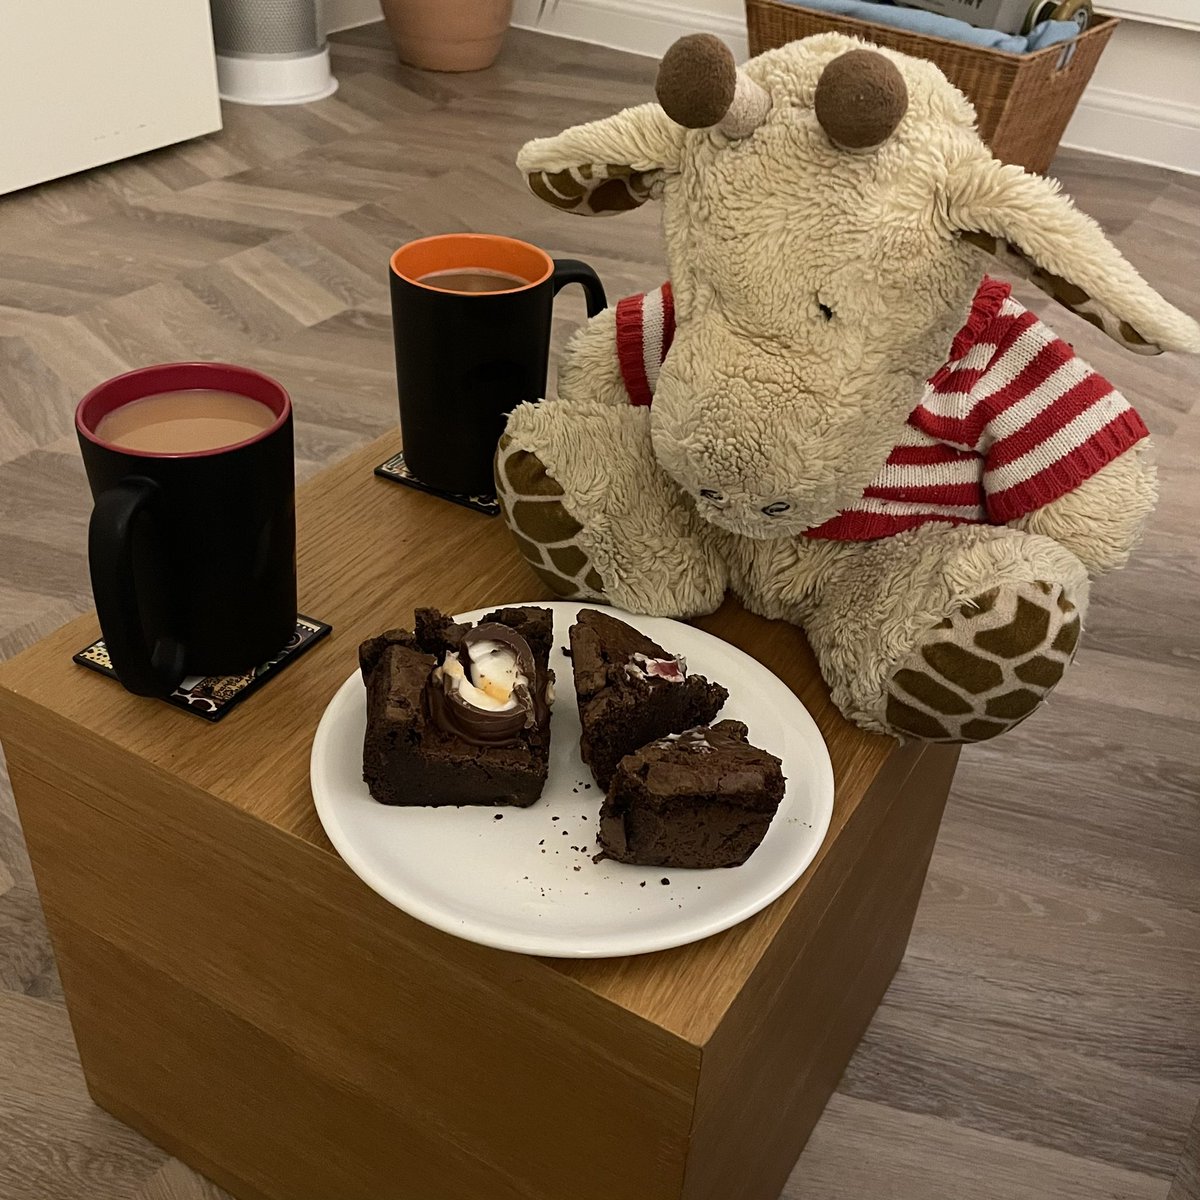 Deciding which choccie brownie to have first - Creme Egg or Black Forest Gateaux? #NationalChocolateCakeDay